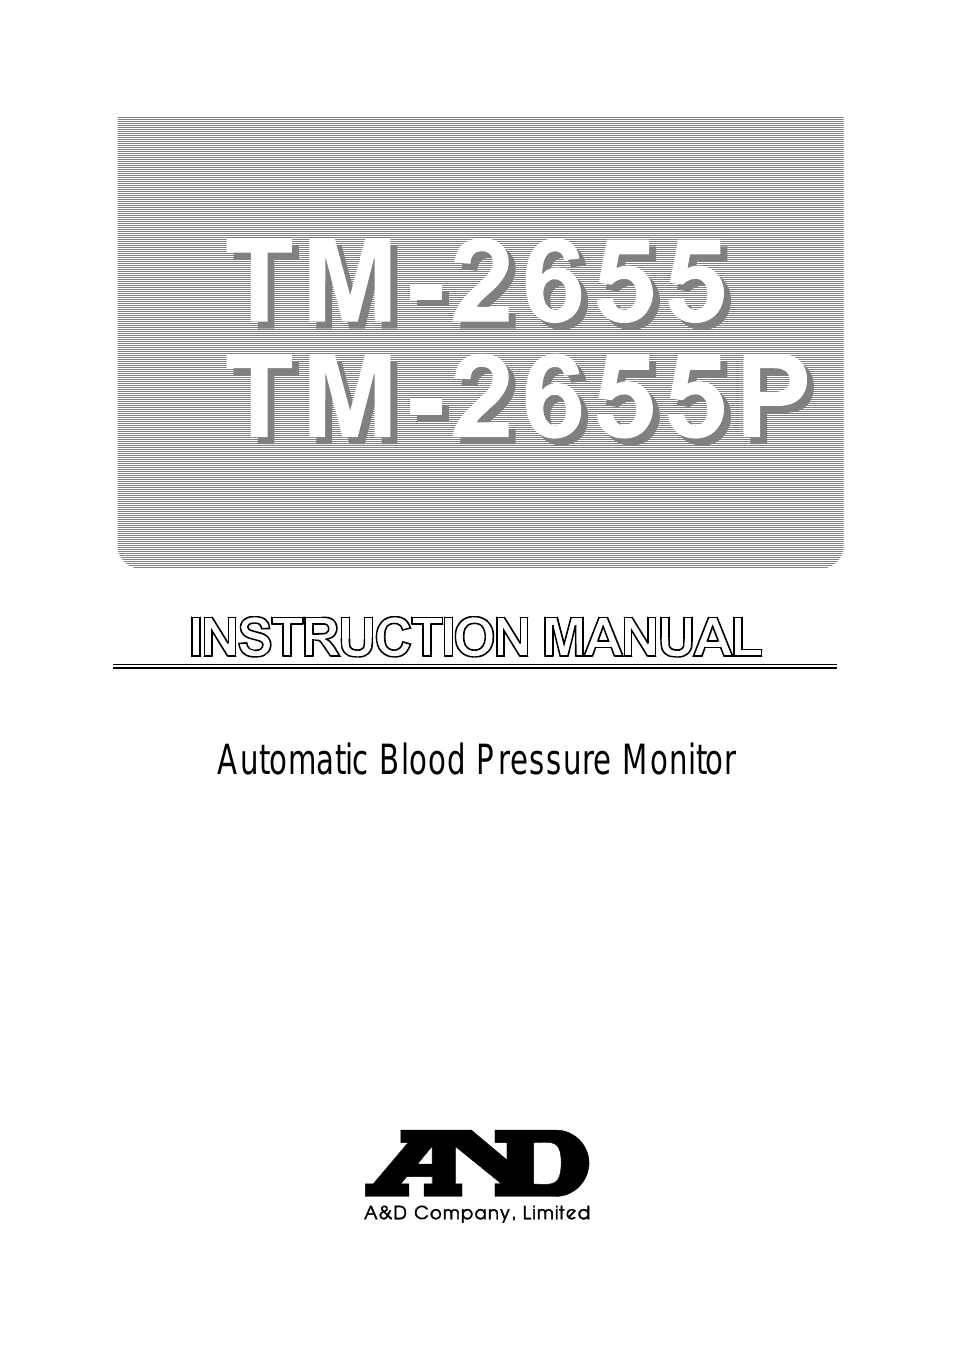 TM-2655 (Page 1)